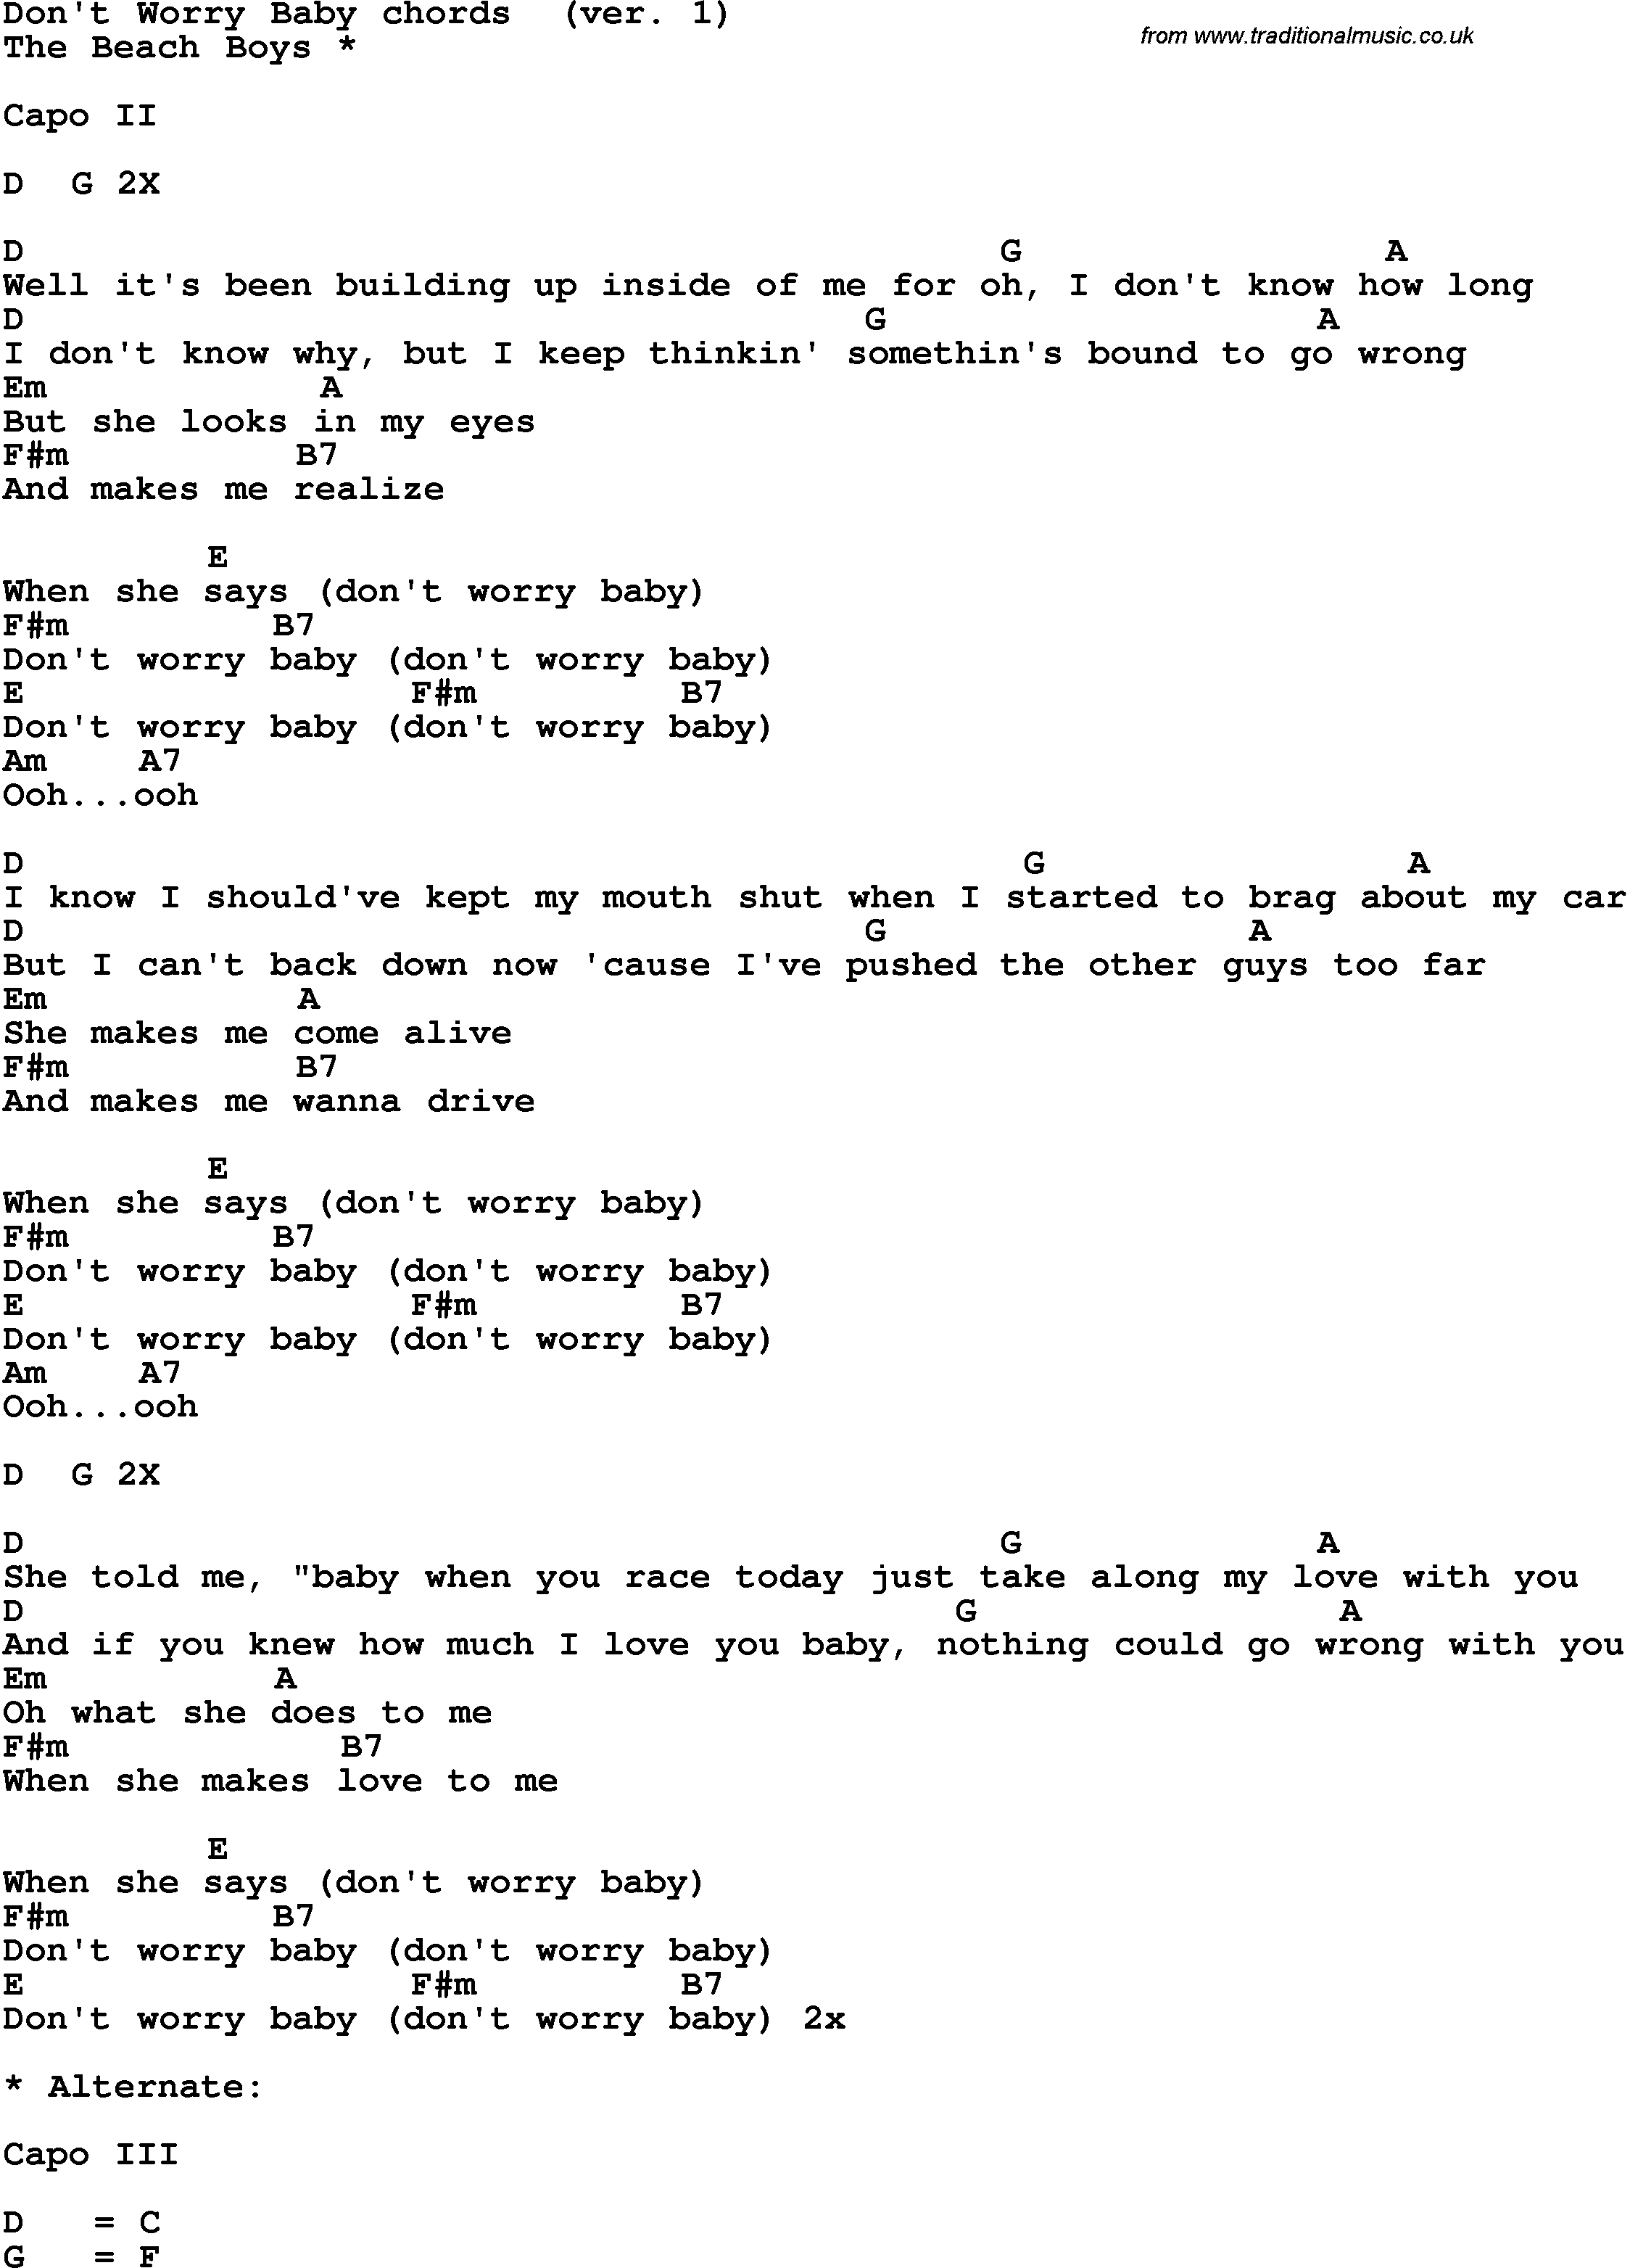 Song Lyrics with guitar chords for Don't Worry Baby